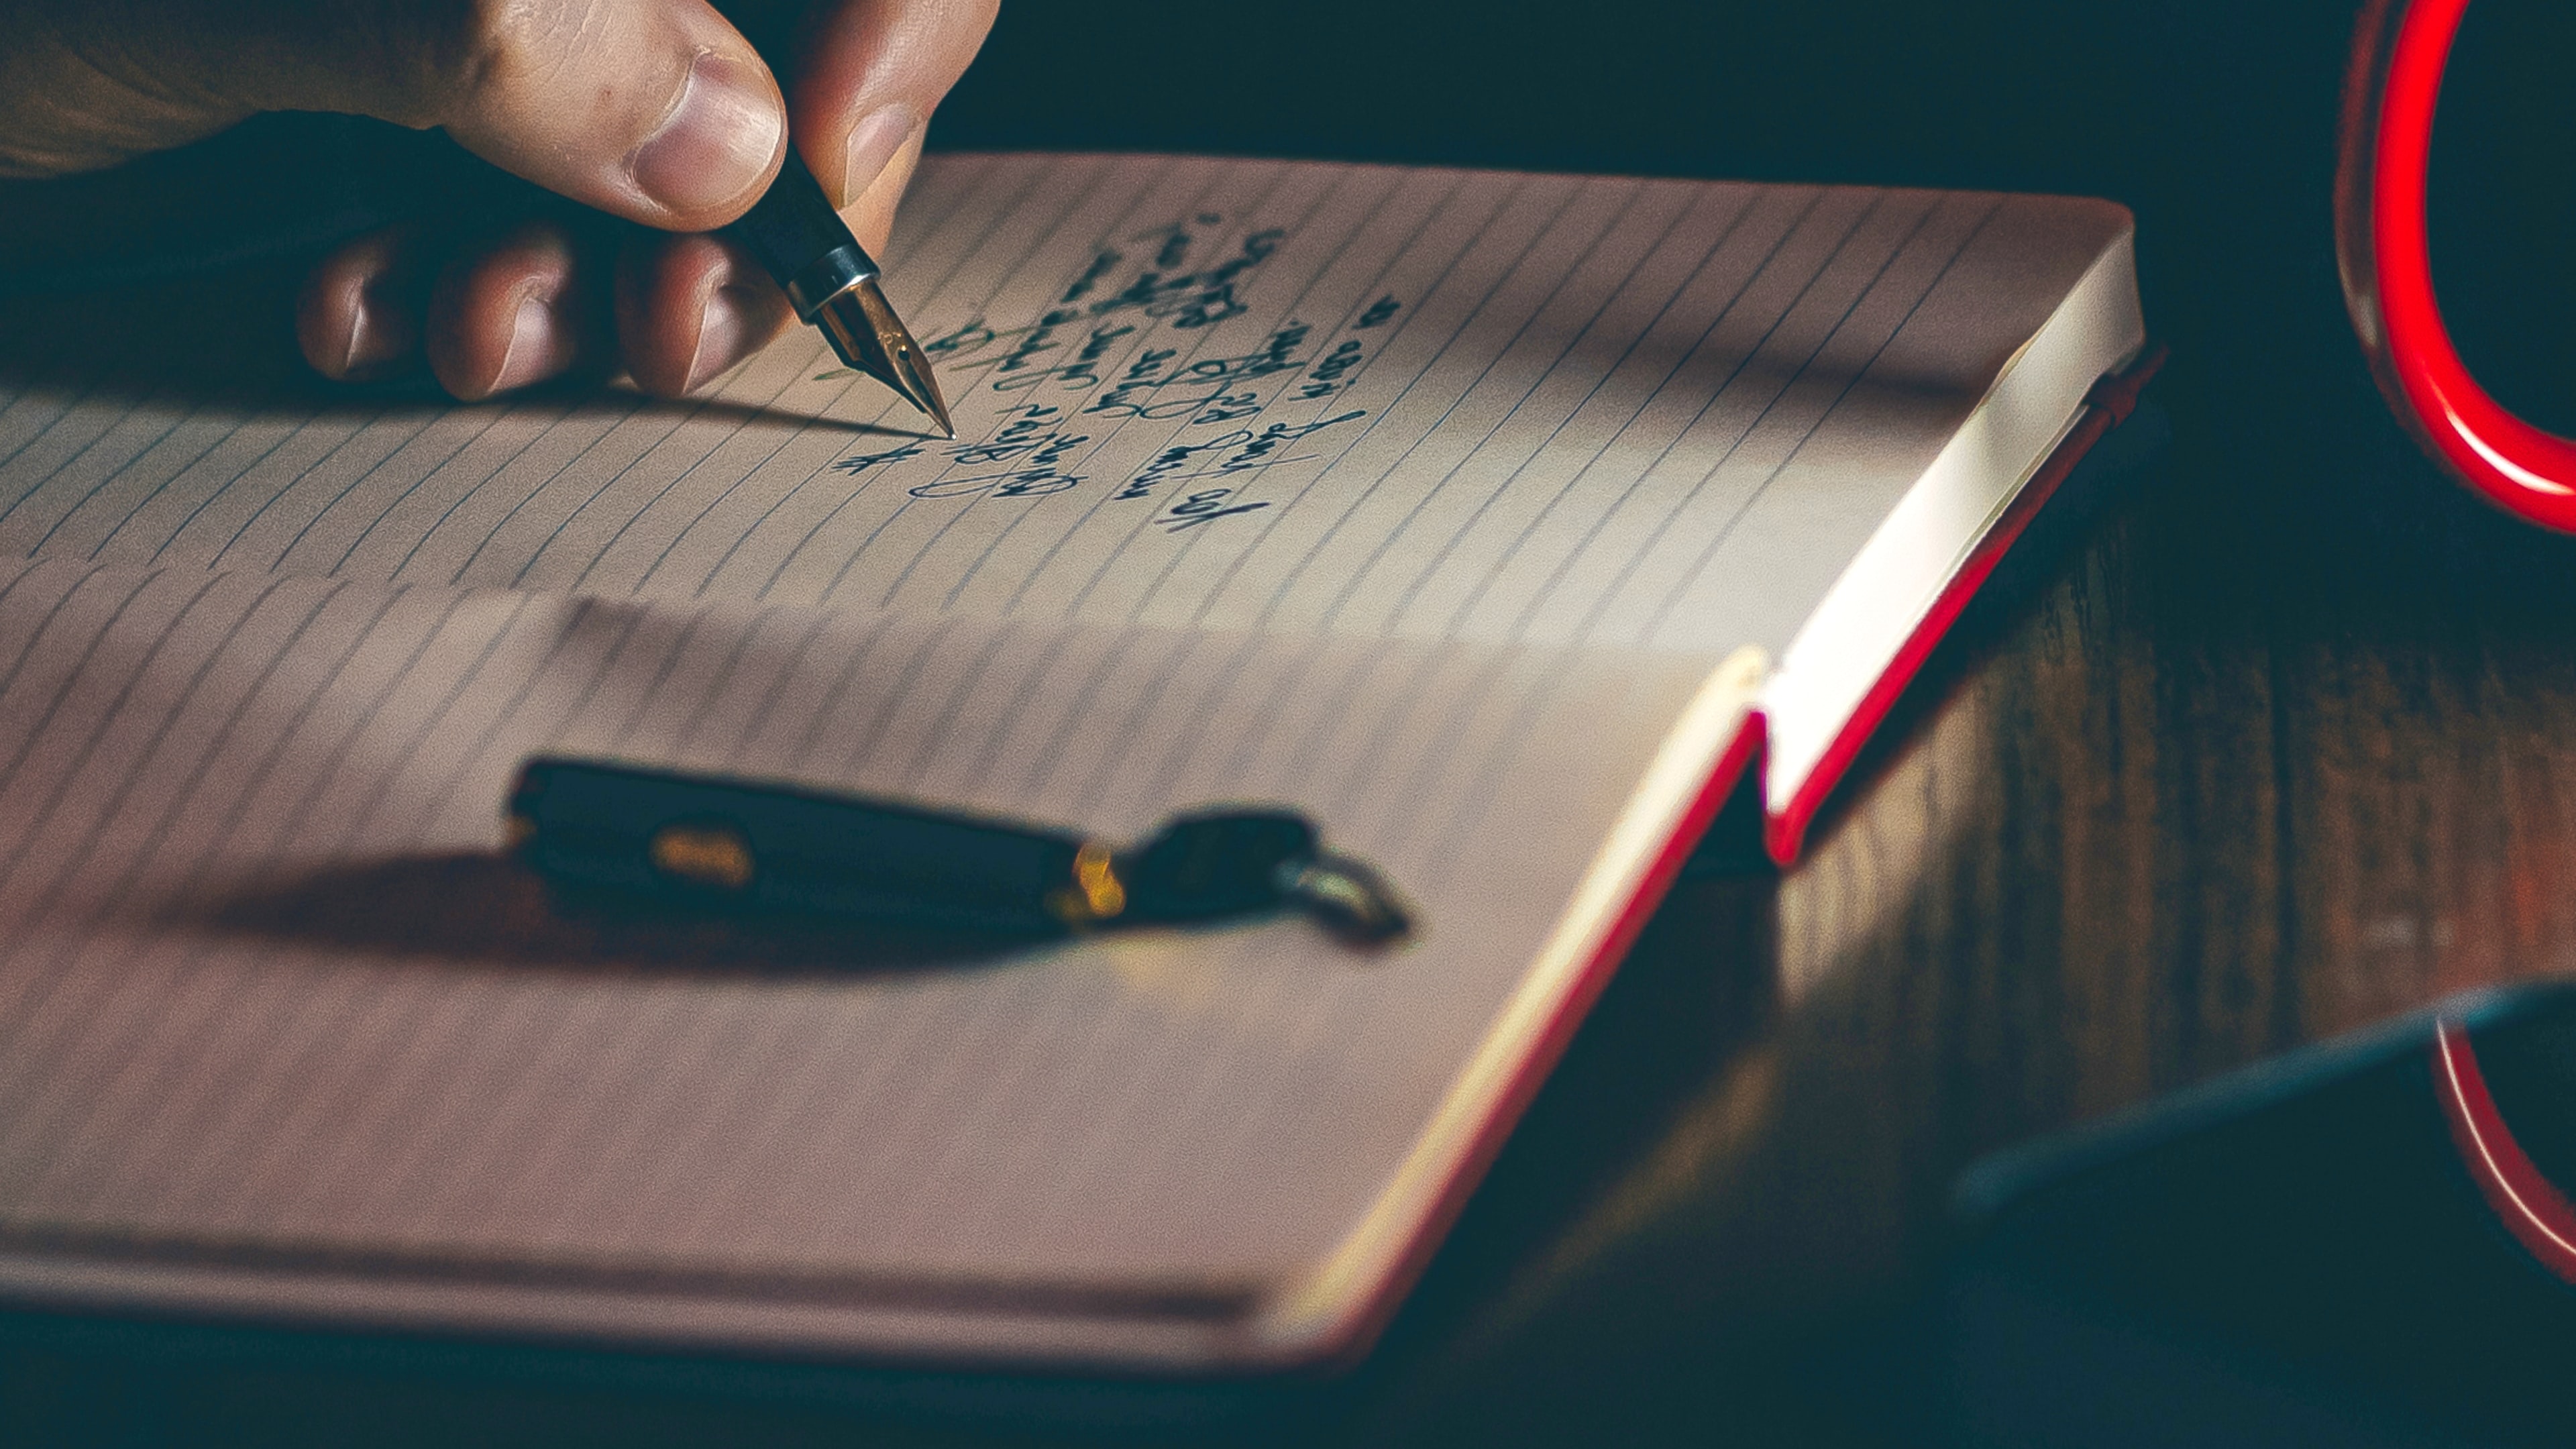 A photo of someone writing with a pen in a journal.